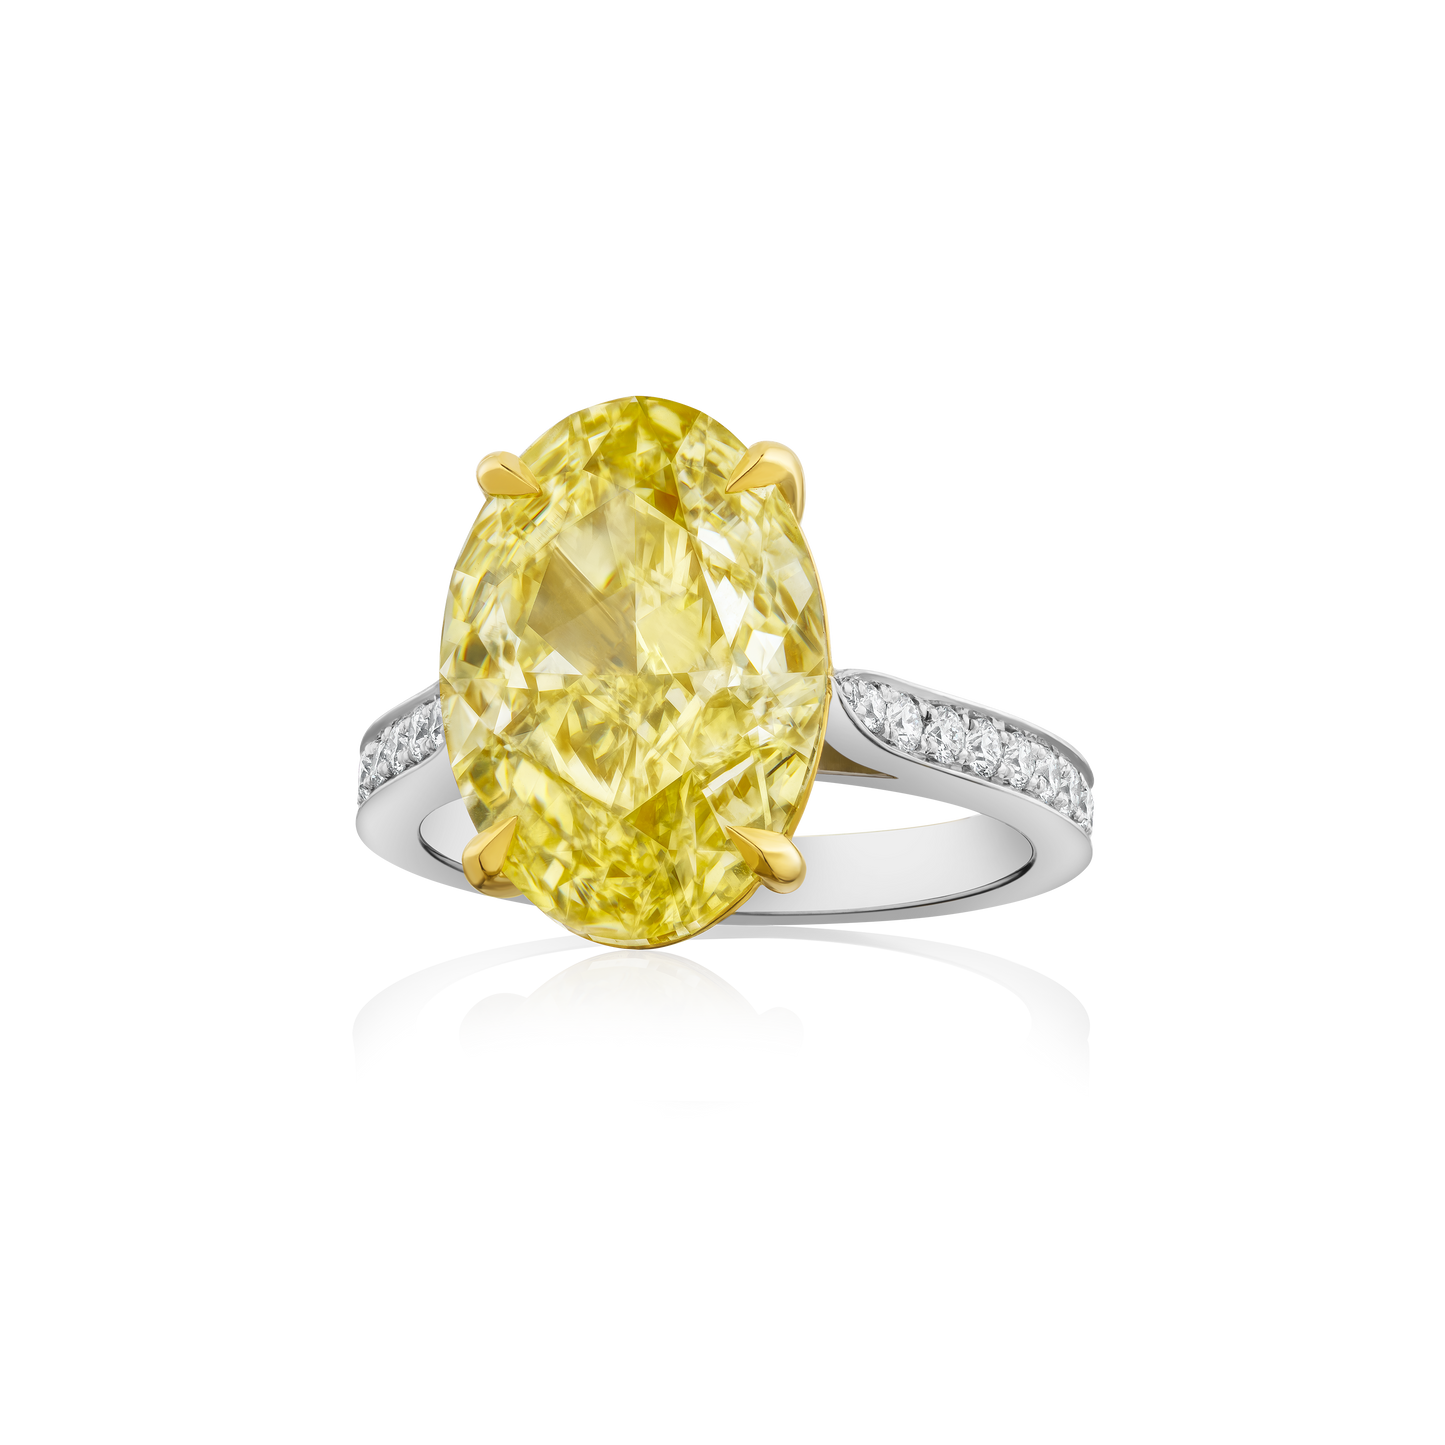 8.02cts Natural Fancy Yellow Oval Diamond Engagement Ring